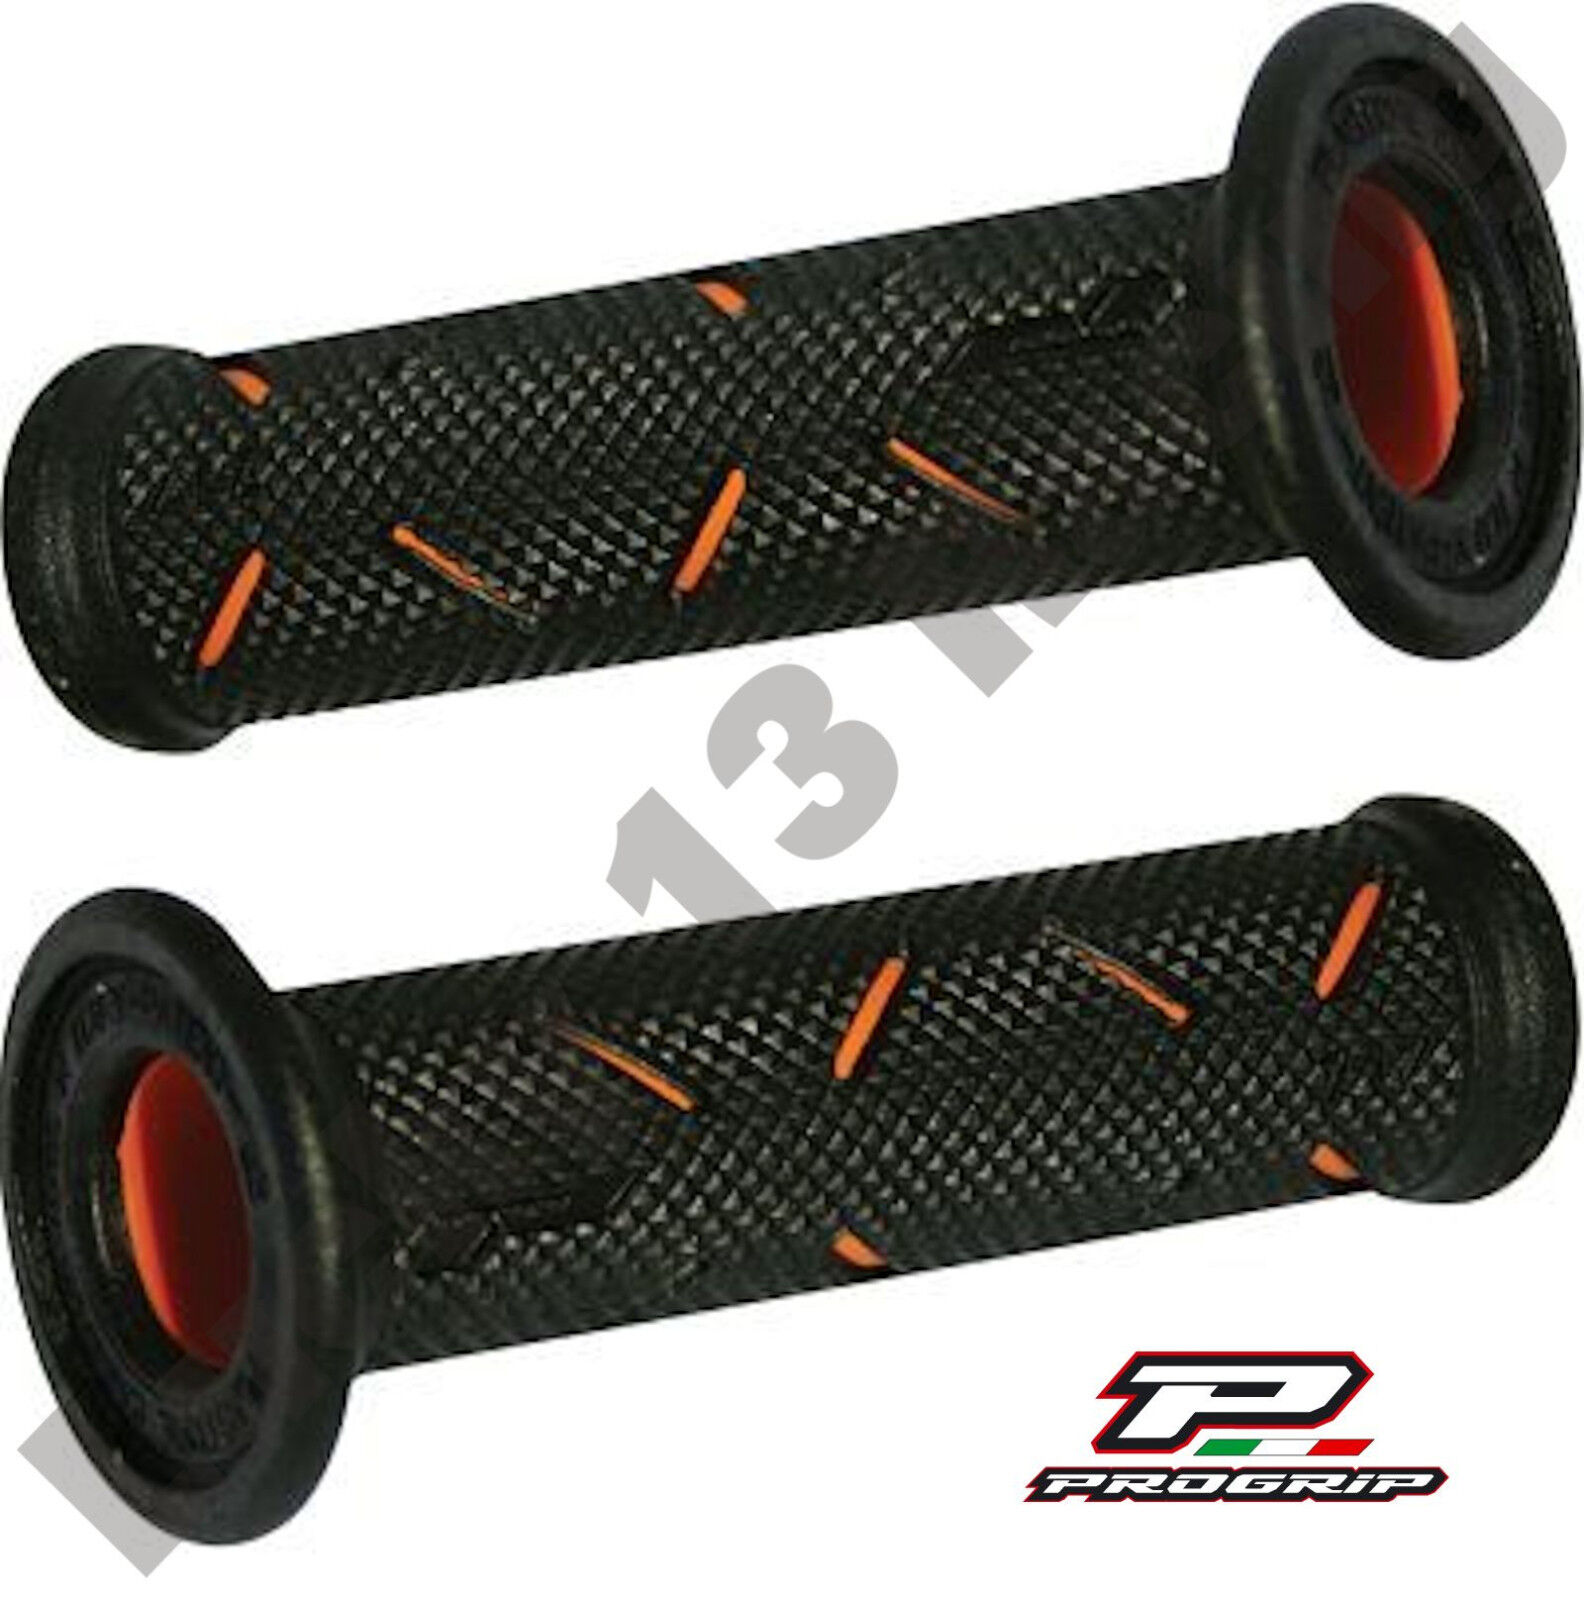 Progrip Gel Touch Dual Compound Grips ORANGE pair to fit 22mm 7/8" handle bars 